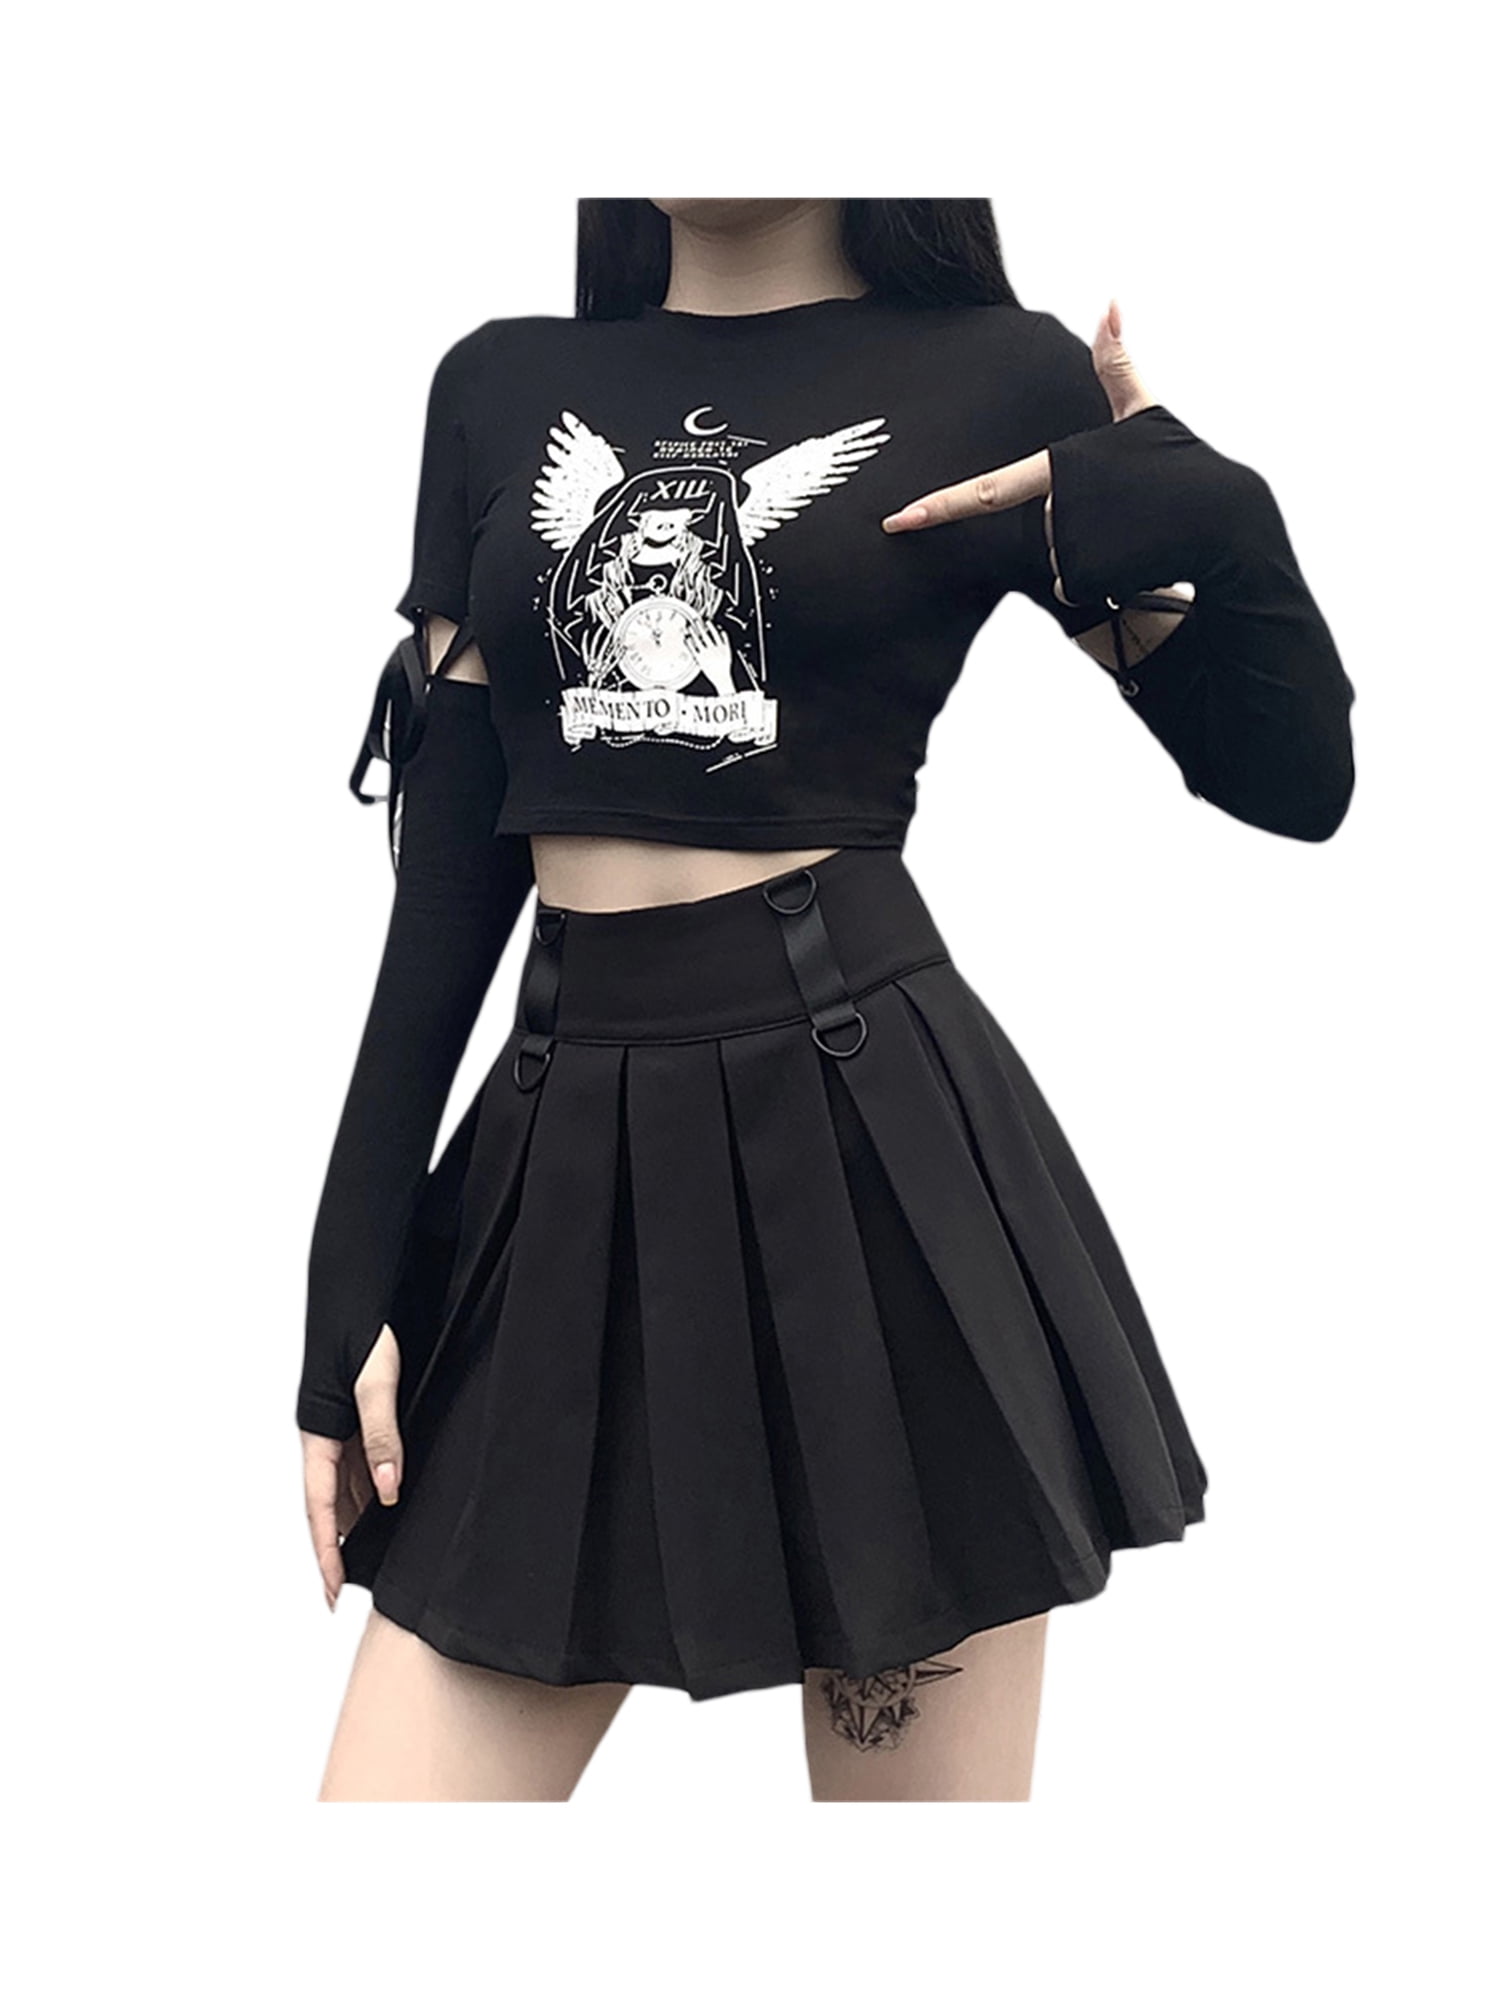 Tops  Anime Lovers Crop Top One Sizemodel Is Size Small  Poshmark